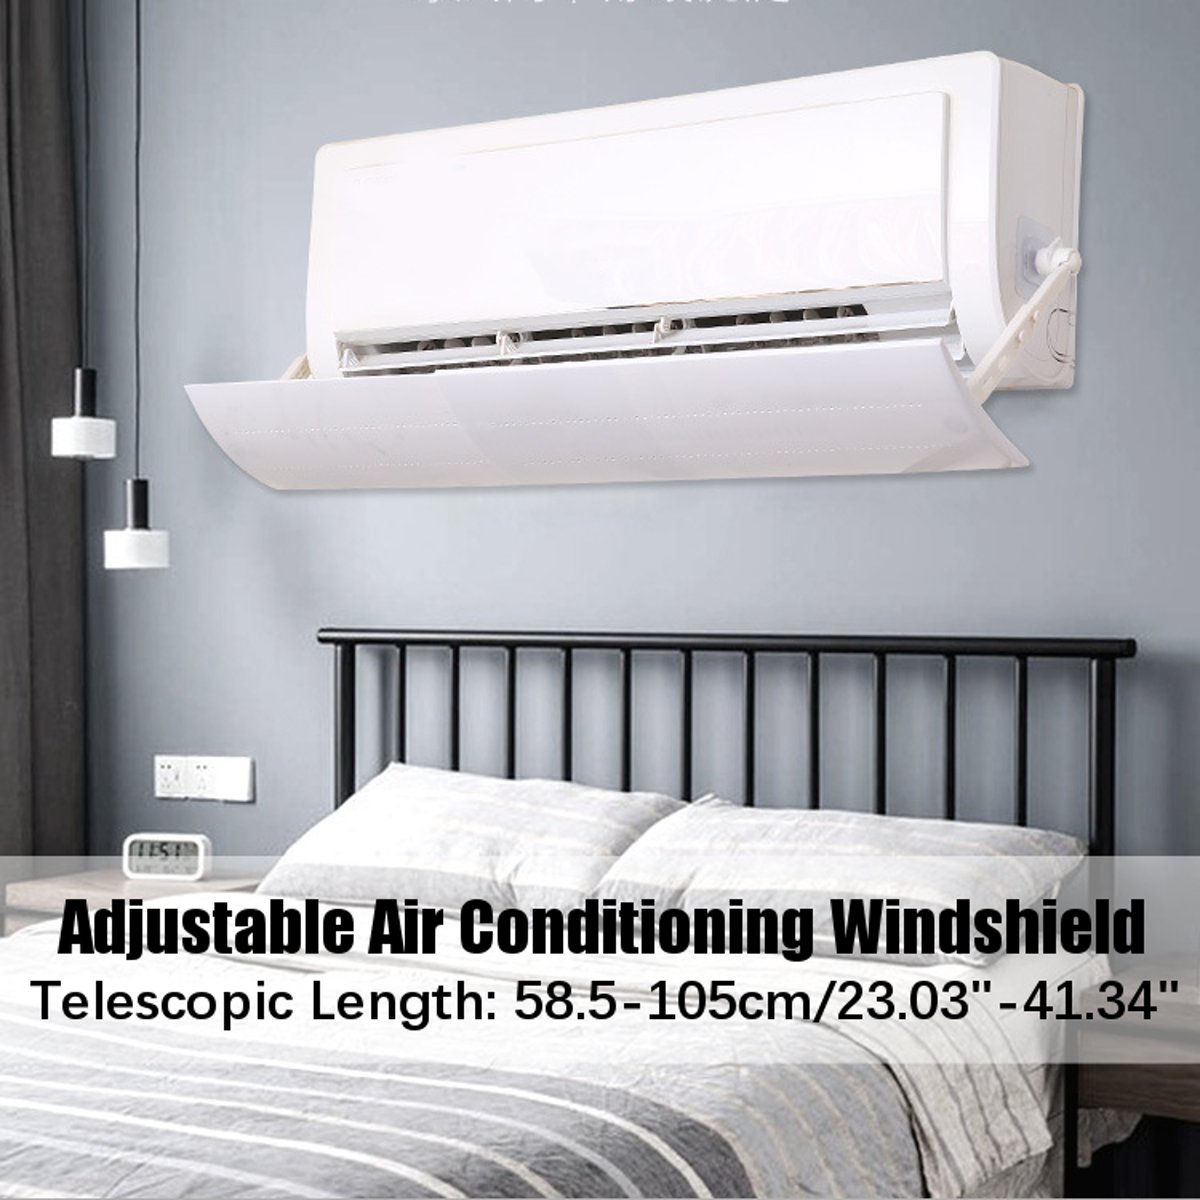 Adjustable-Air-Conditioner-Wind-Shield-Air-Conditioning-Baffle-Windshield-Home-Cooler-Windproof-1535791-2